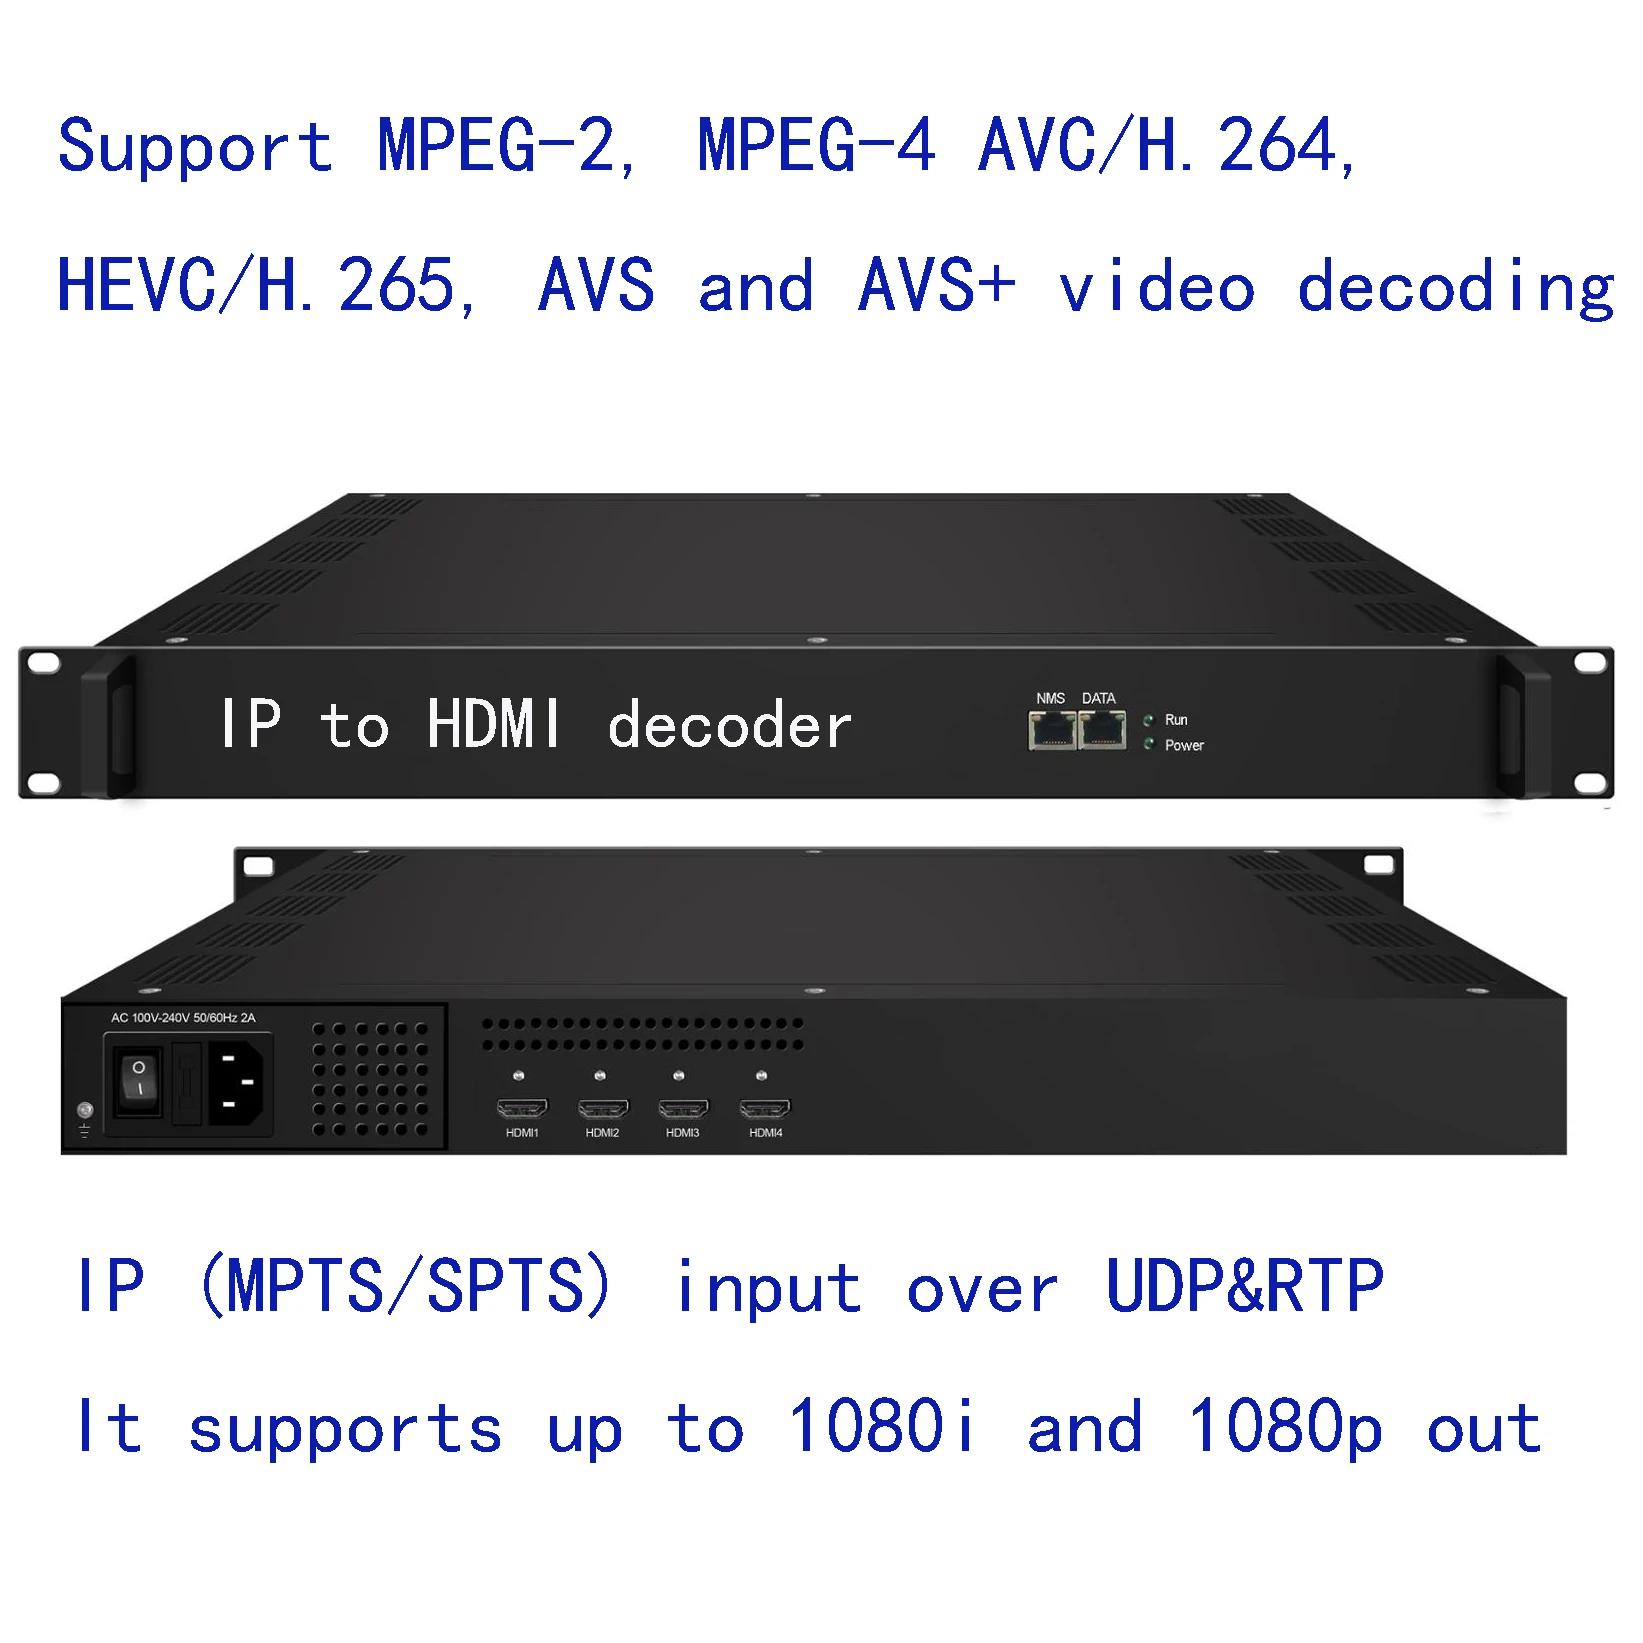 

IP to HDMI decoder, TS decoder, MPTS/SPTS to 4/8/12 HDMI decoder, UDP/RTP to HDMI decoder